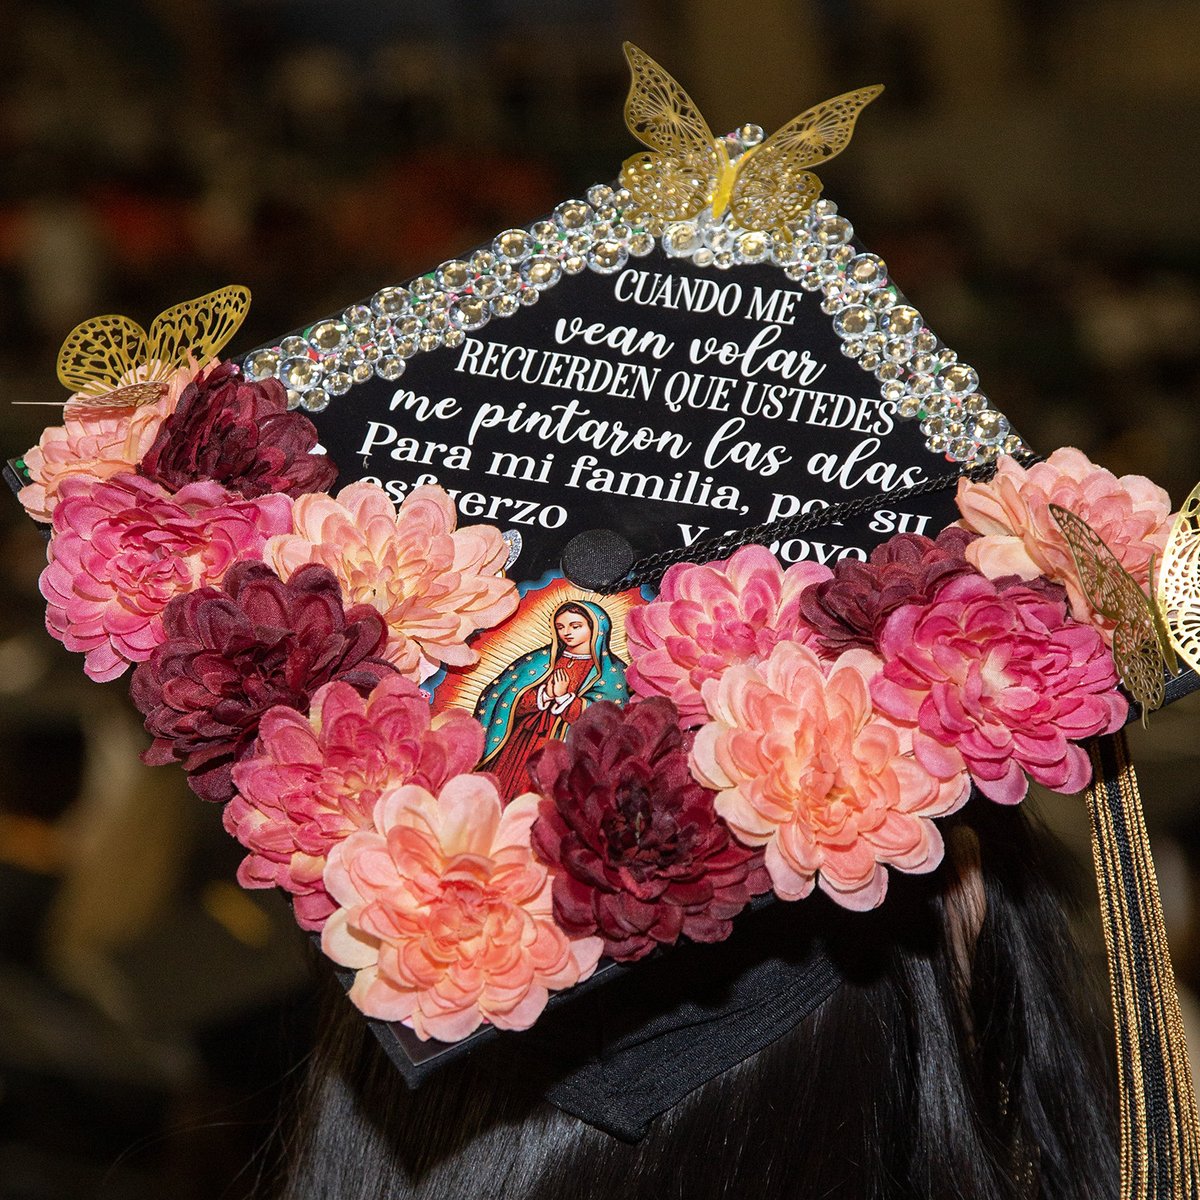 Temple College Class of 2024 Graduates! Stop by the Arnold Student Union from 11:30-1 p.m. TODAY to decorate your graduation cap. Phi Theta Kappa Honor Society is providing materials to help you have the best-looking cap possible! #YourCommunitysCollege #Classof2024 #TCGrads2024